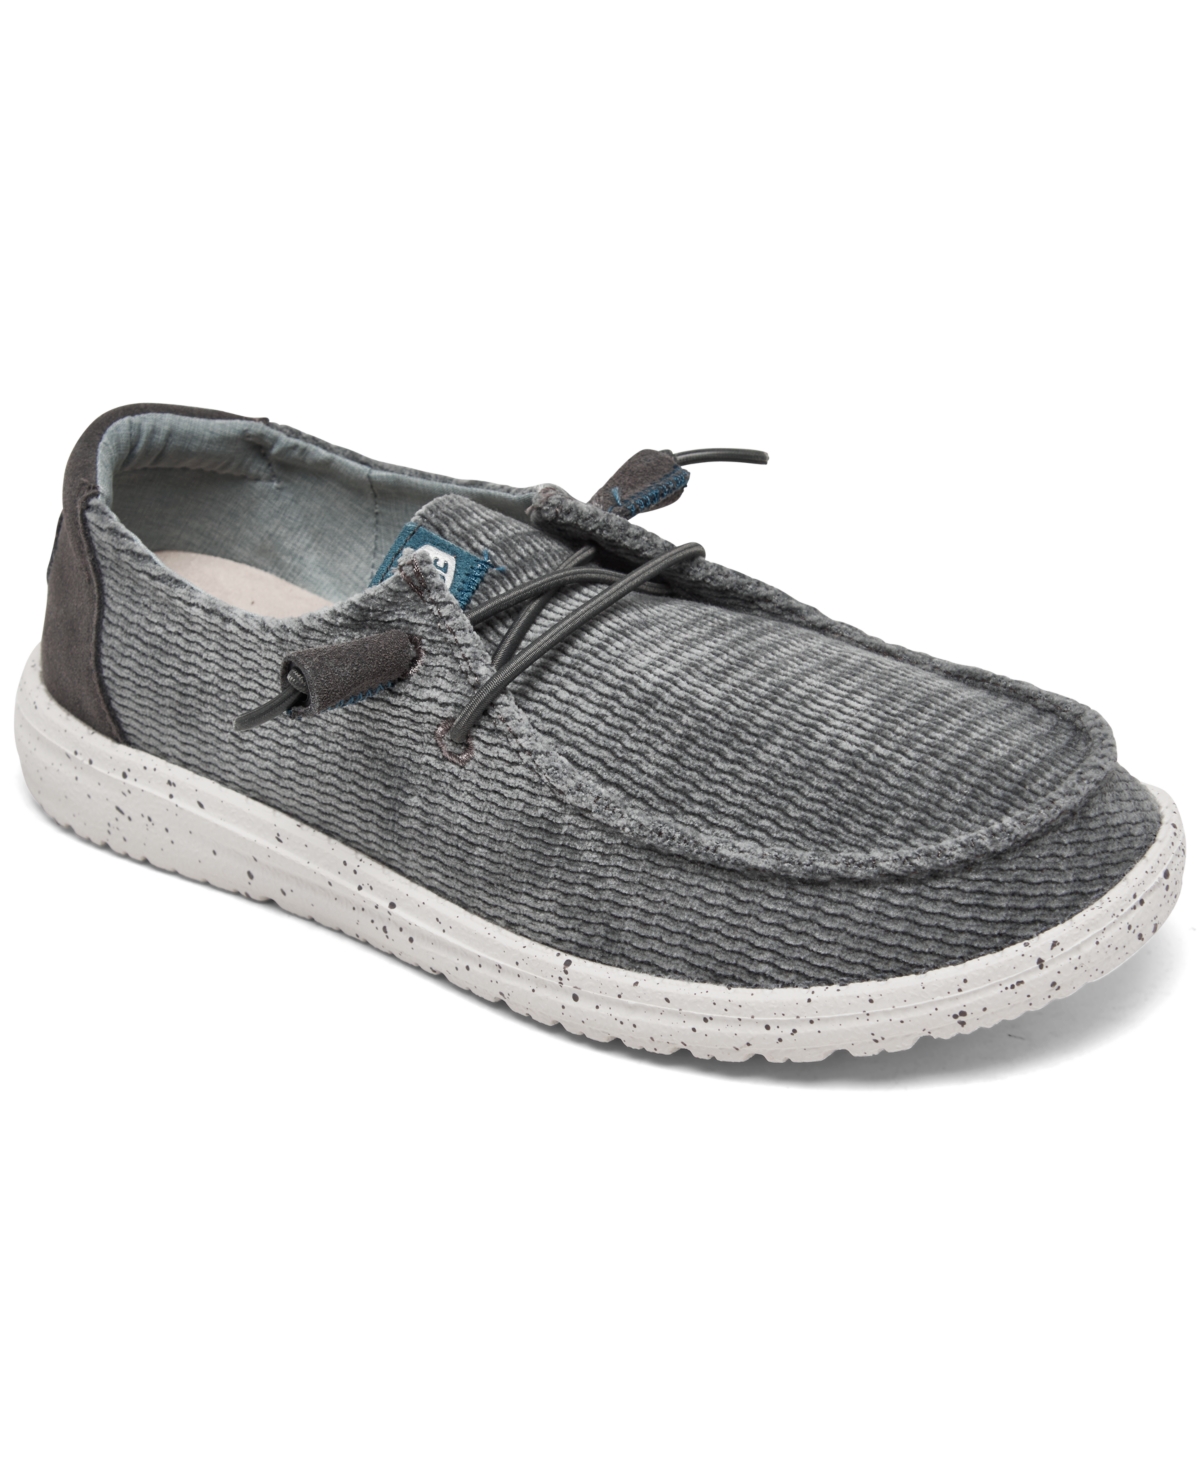 Women's Wendy Corduroy Slip-On Casual Moccasin Sneakers from Finish Line - Charcoal